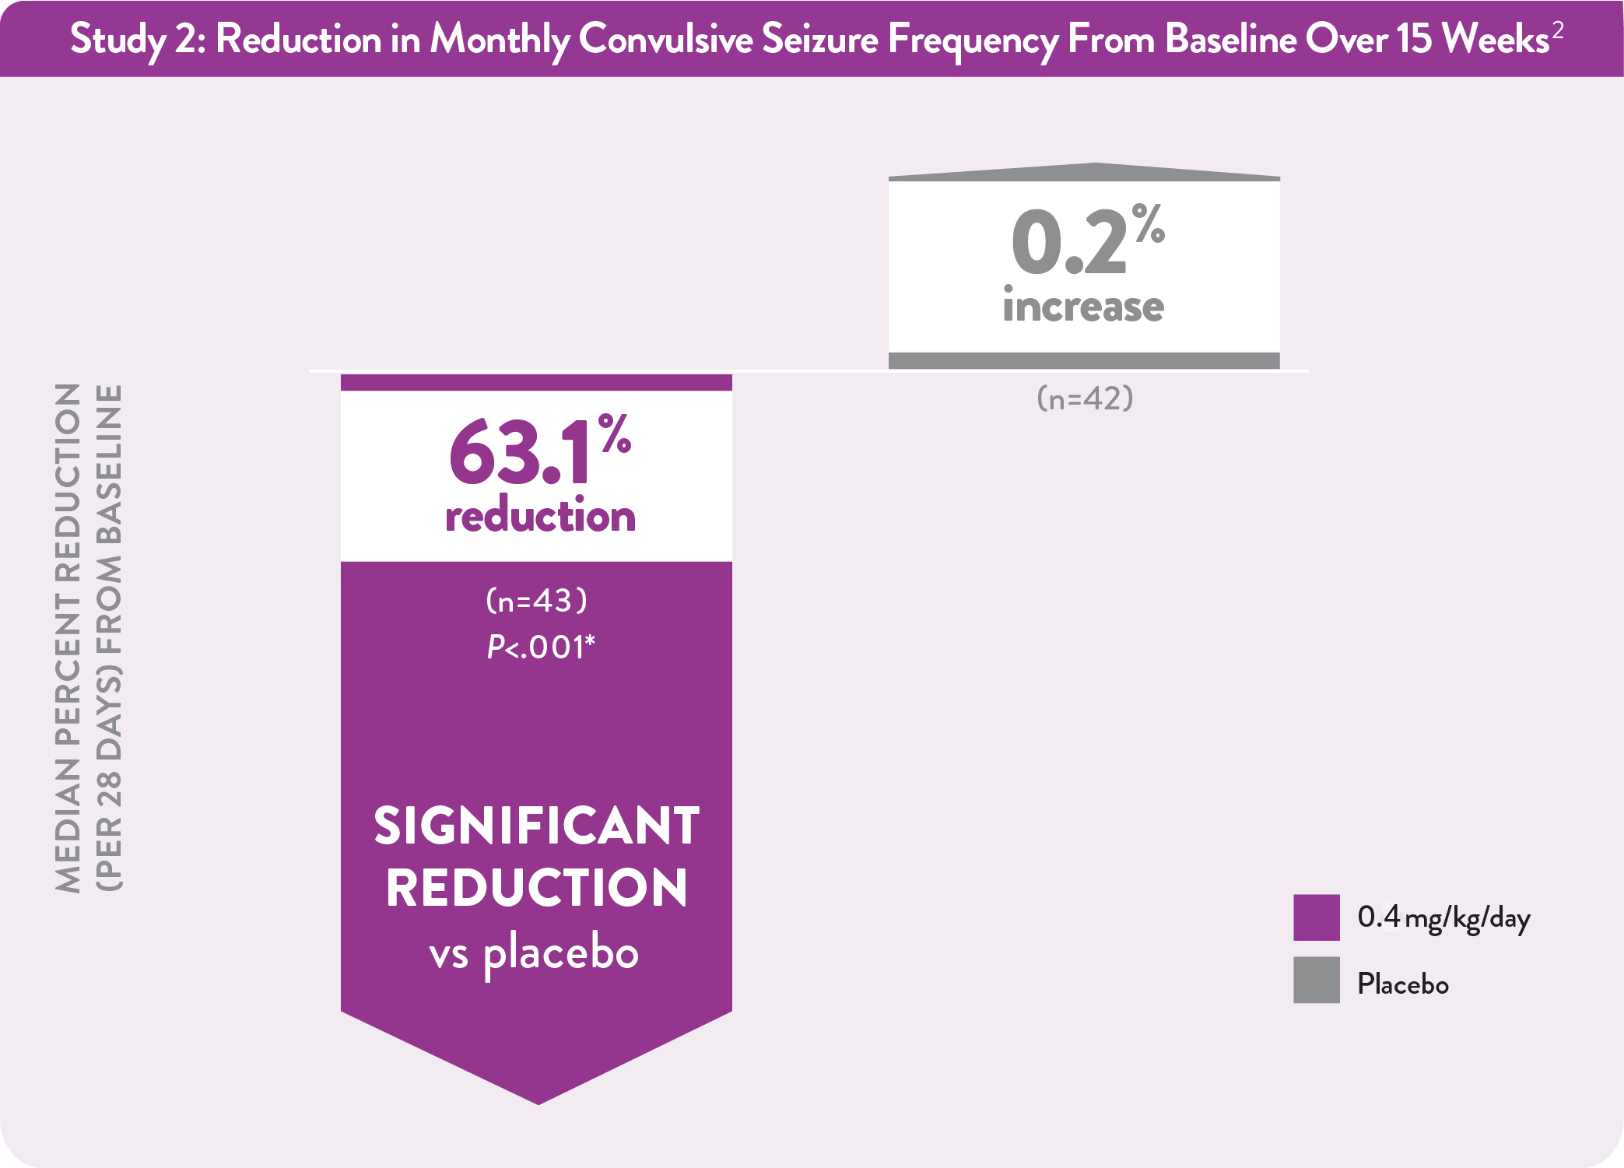 Graph showing a 63.1% reduction in seizure activity from baseline over a 15-week period vs placebo.